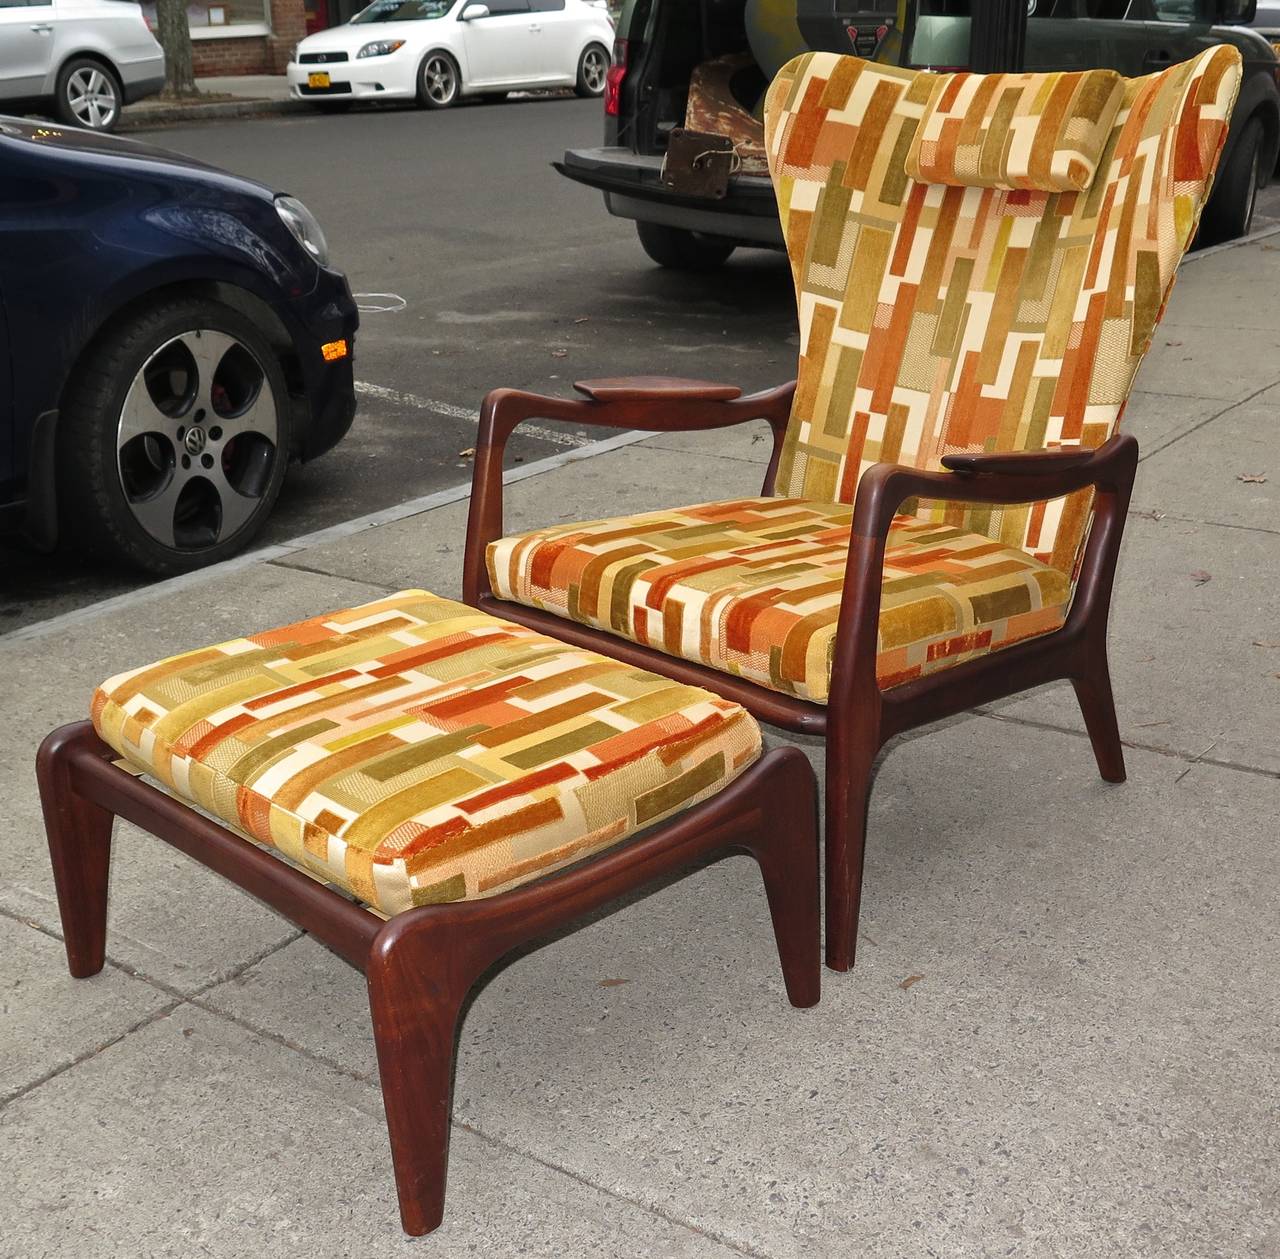 Walnut construction. Good straps on both chair and ottoman. Fabric and foam in good condition and acceptable for use. Could be easily reupholstered with new fabric. Some minor scuffs on wood. Ottoman measures 25.5 in. W x 22 in. D x 14.5 in. H. 